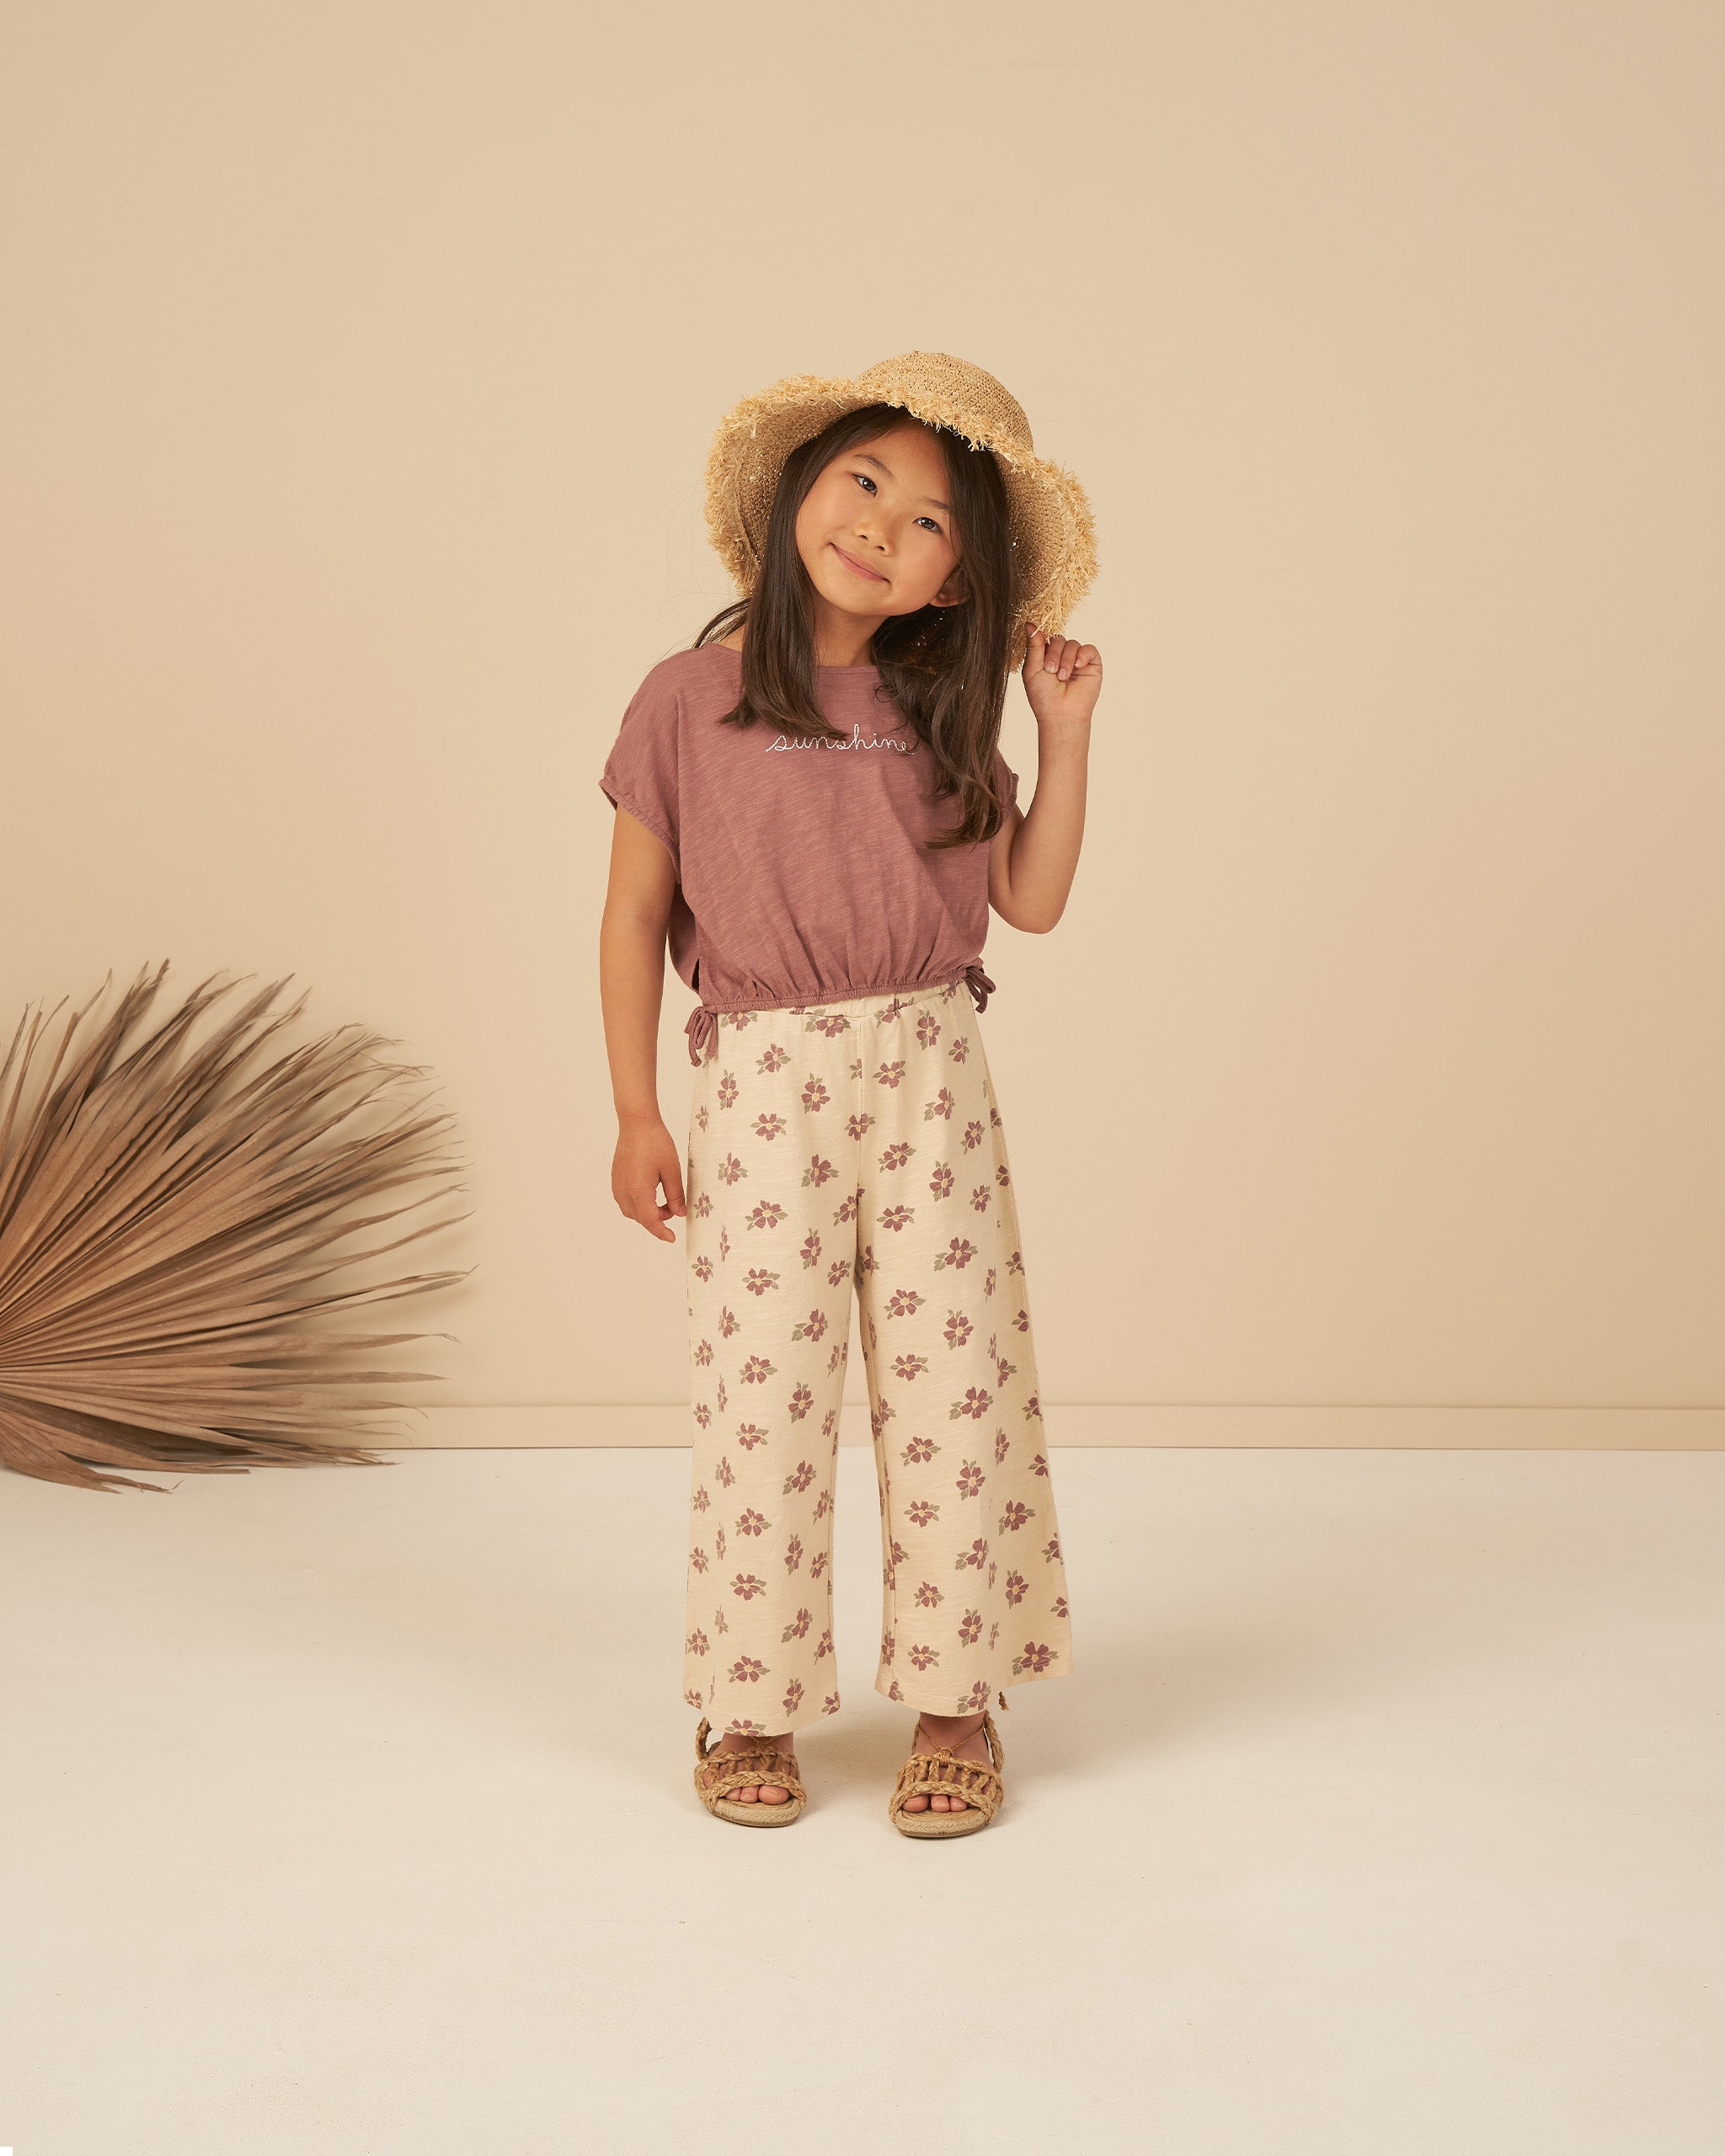 Wide Leg Pant || Kauai - Rylee + Cru | Kids Clothes | Trendy Baby Clothes | Modern Infant Outfits |